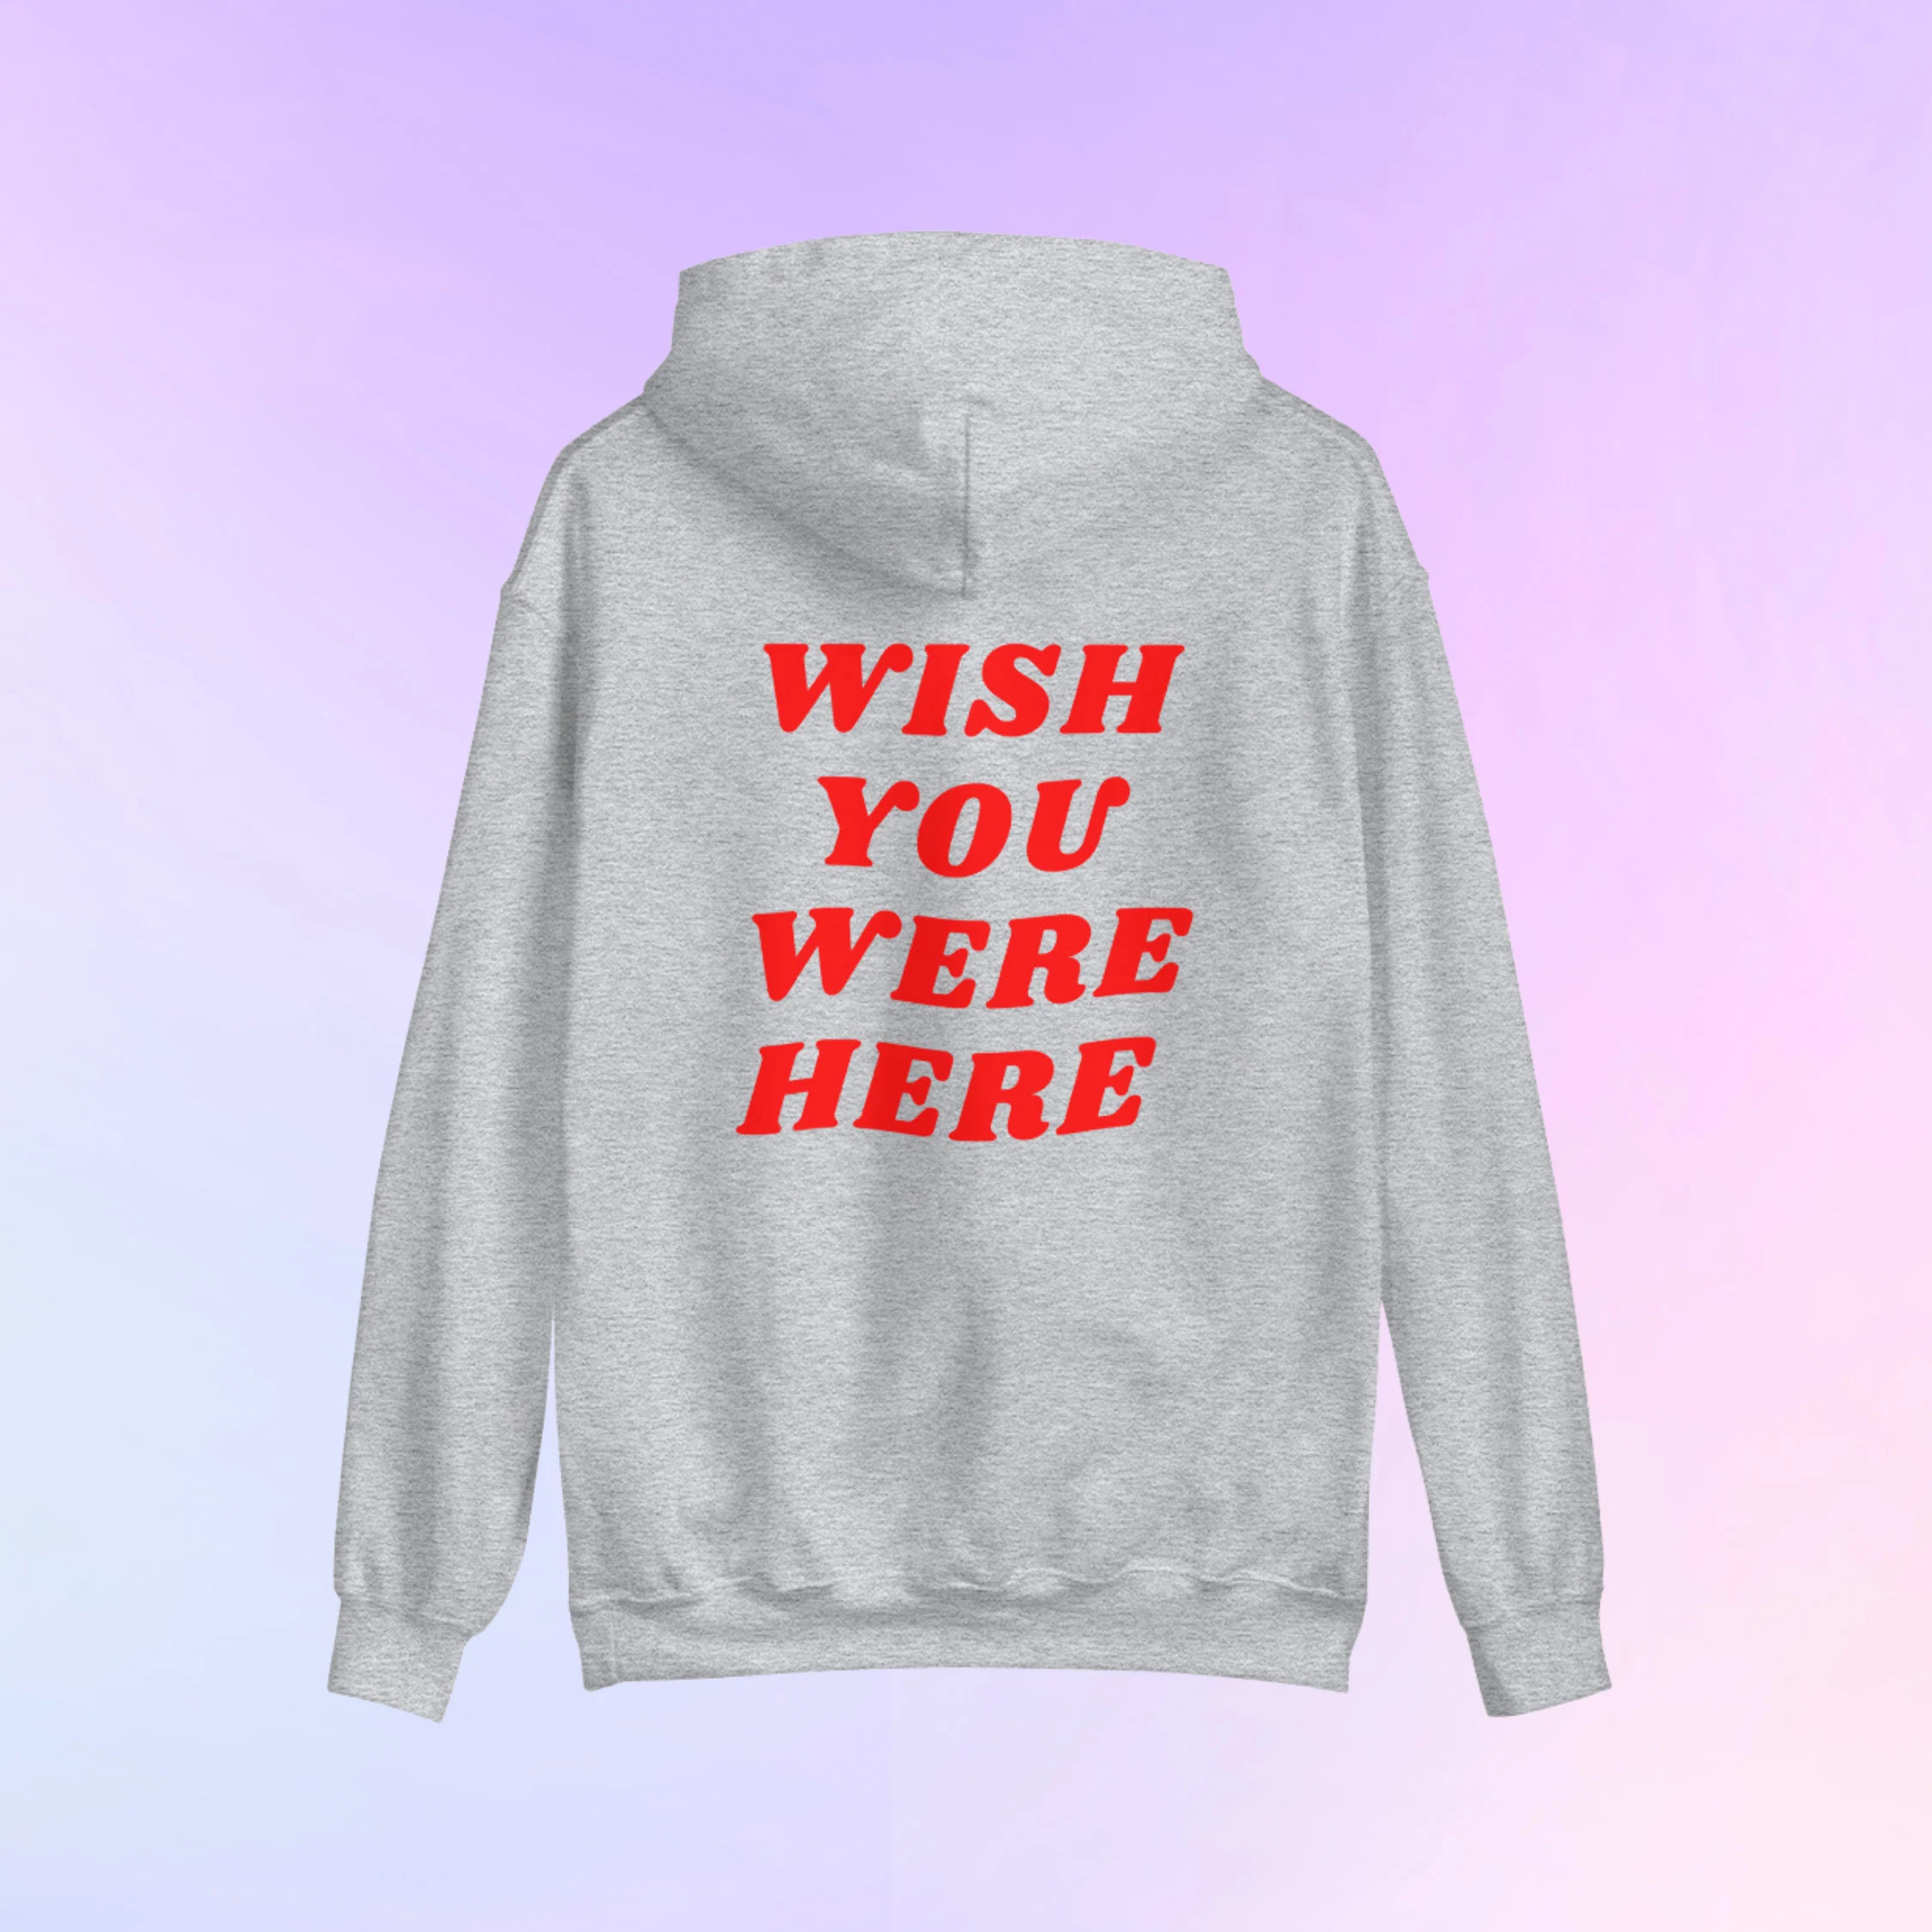 Raise Your Closet with Comfortable Hoodies